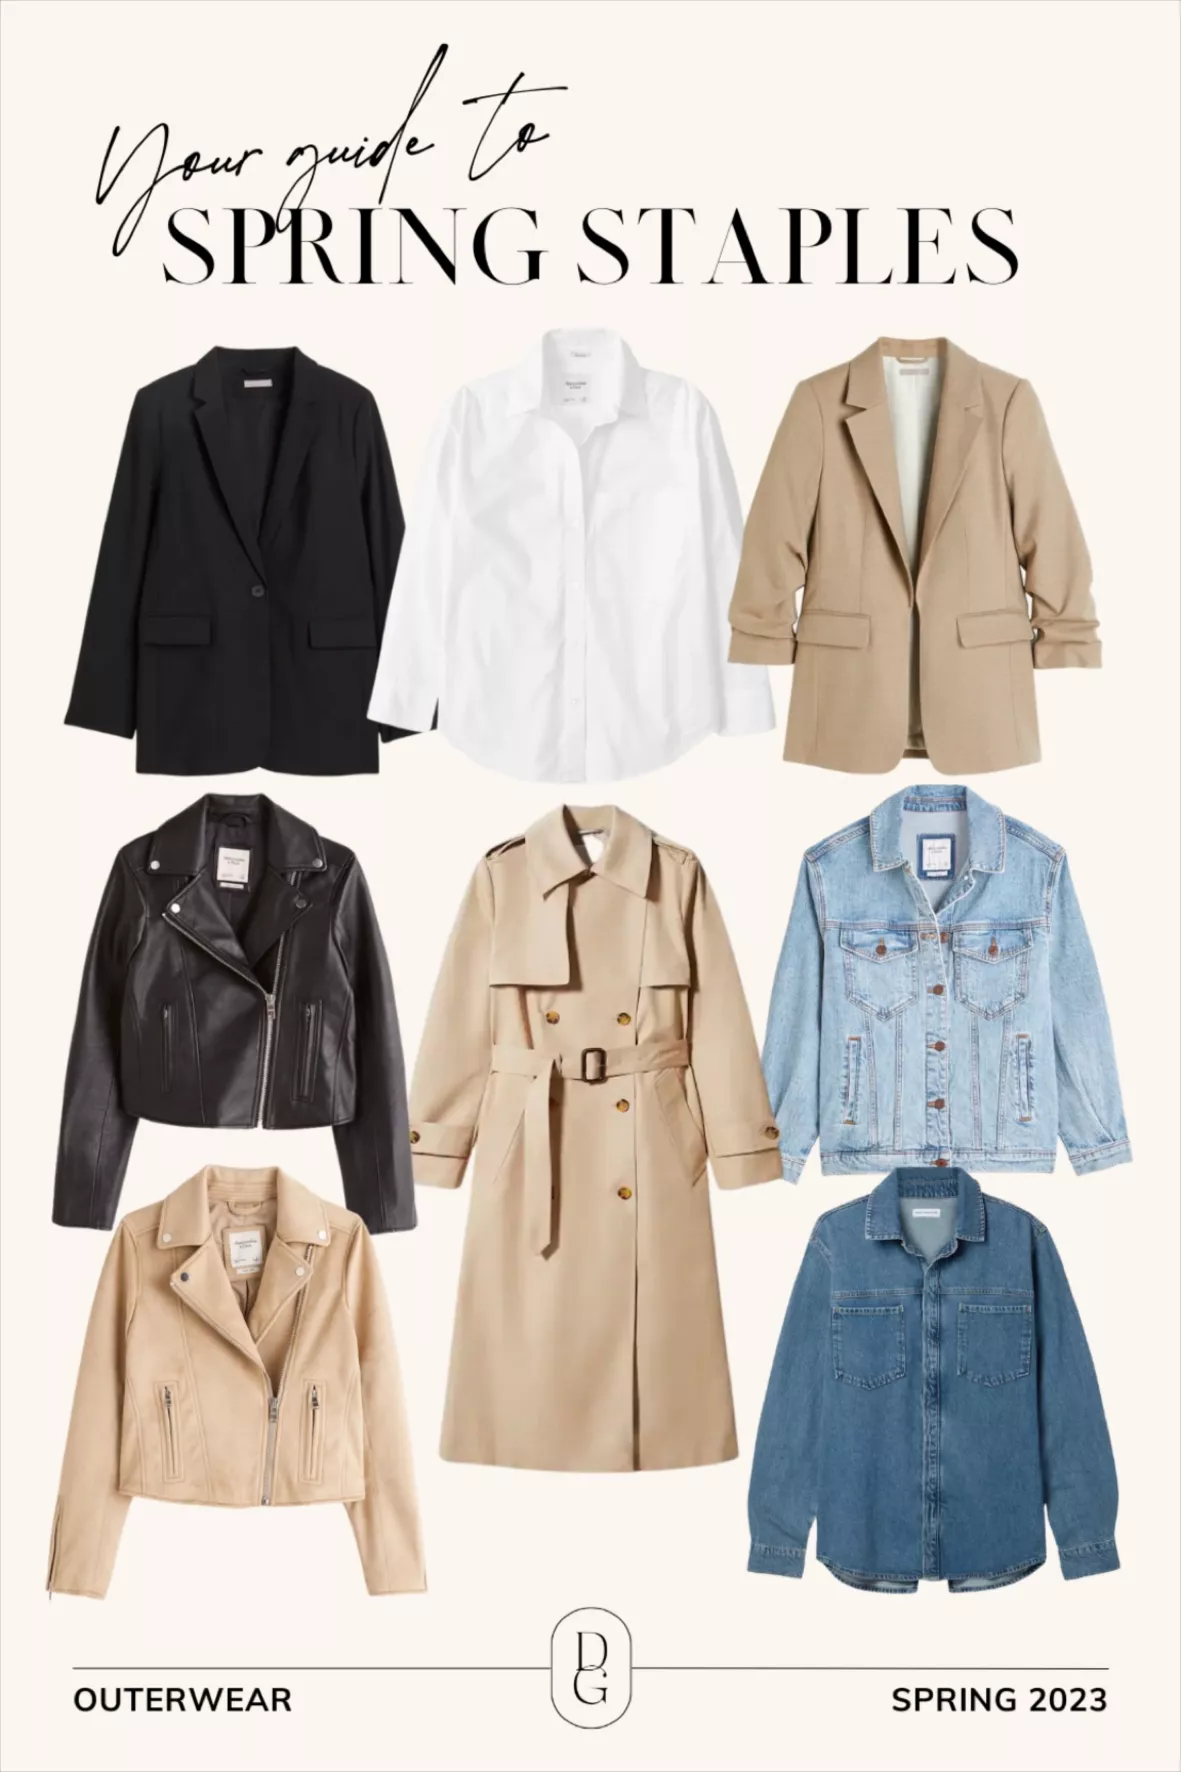 Coats for women are a must-have for your wardrobe